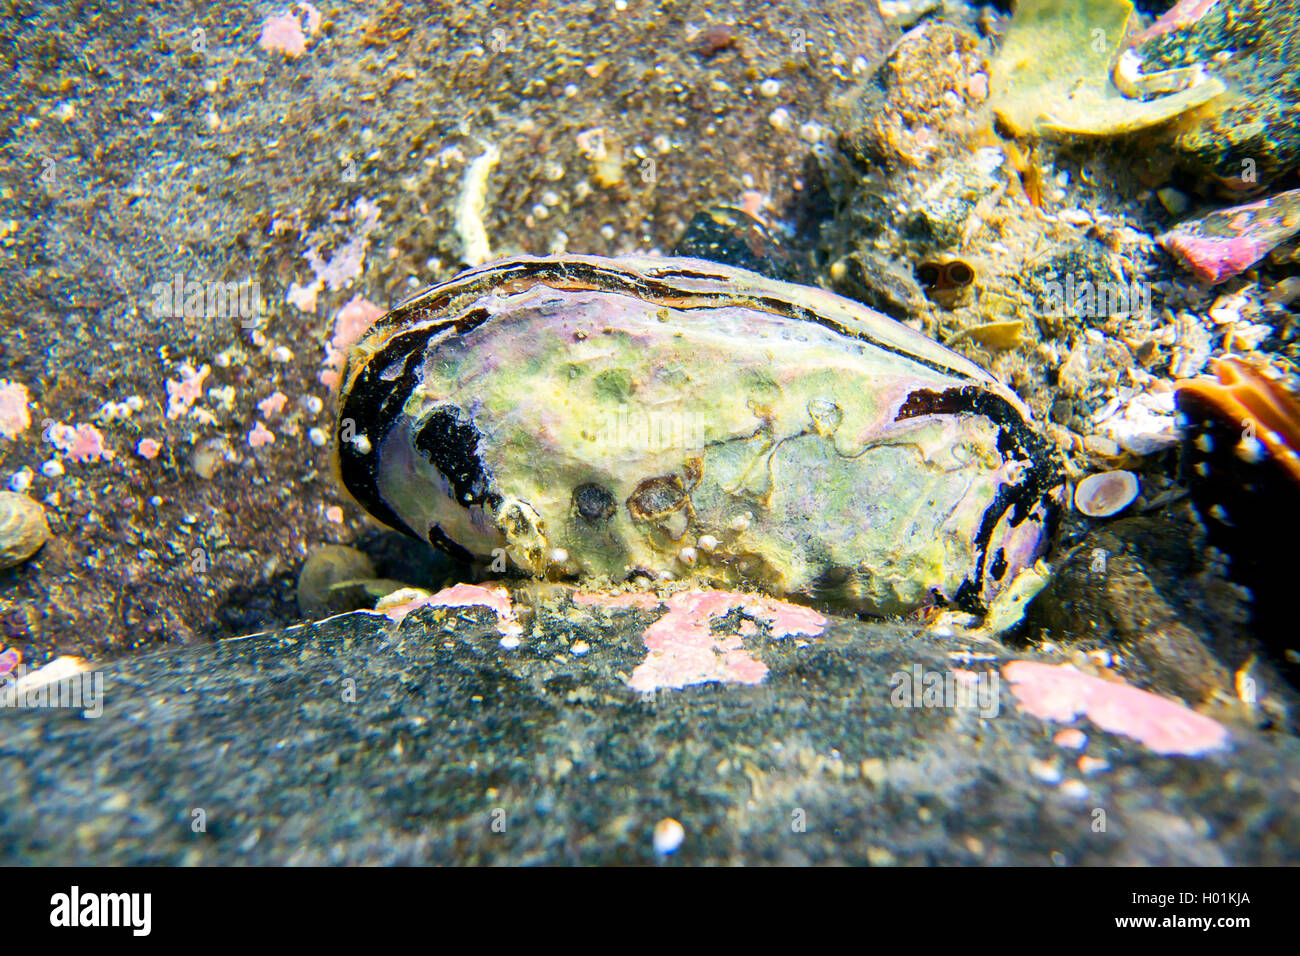 Horse mussel, Northern horsemussel (Modiolus modiolus, Modiola gigantea), at a stone in shallow water, Norway, Troms, Tromsoe Stock Photo